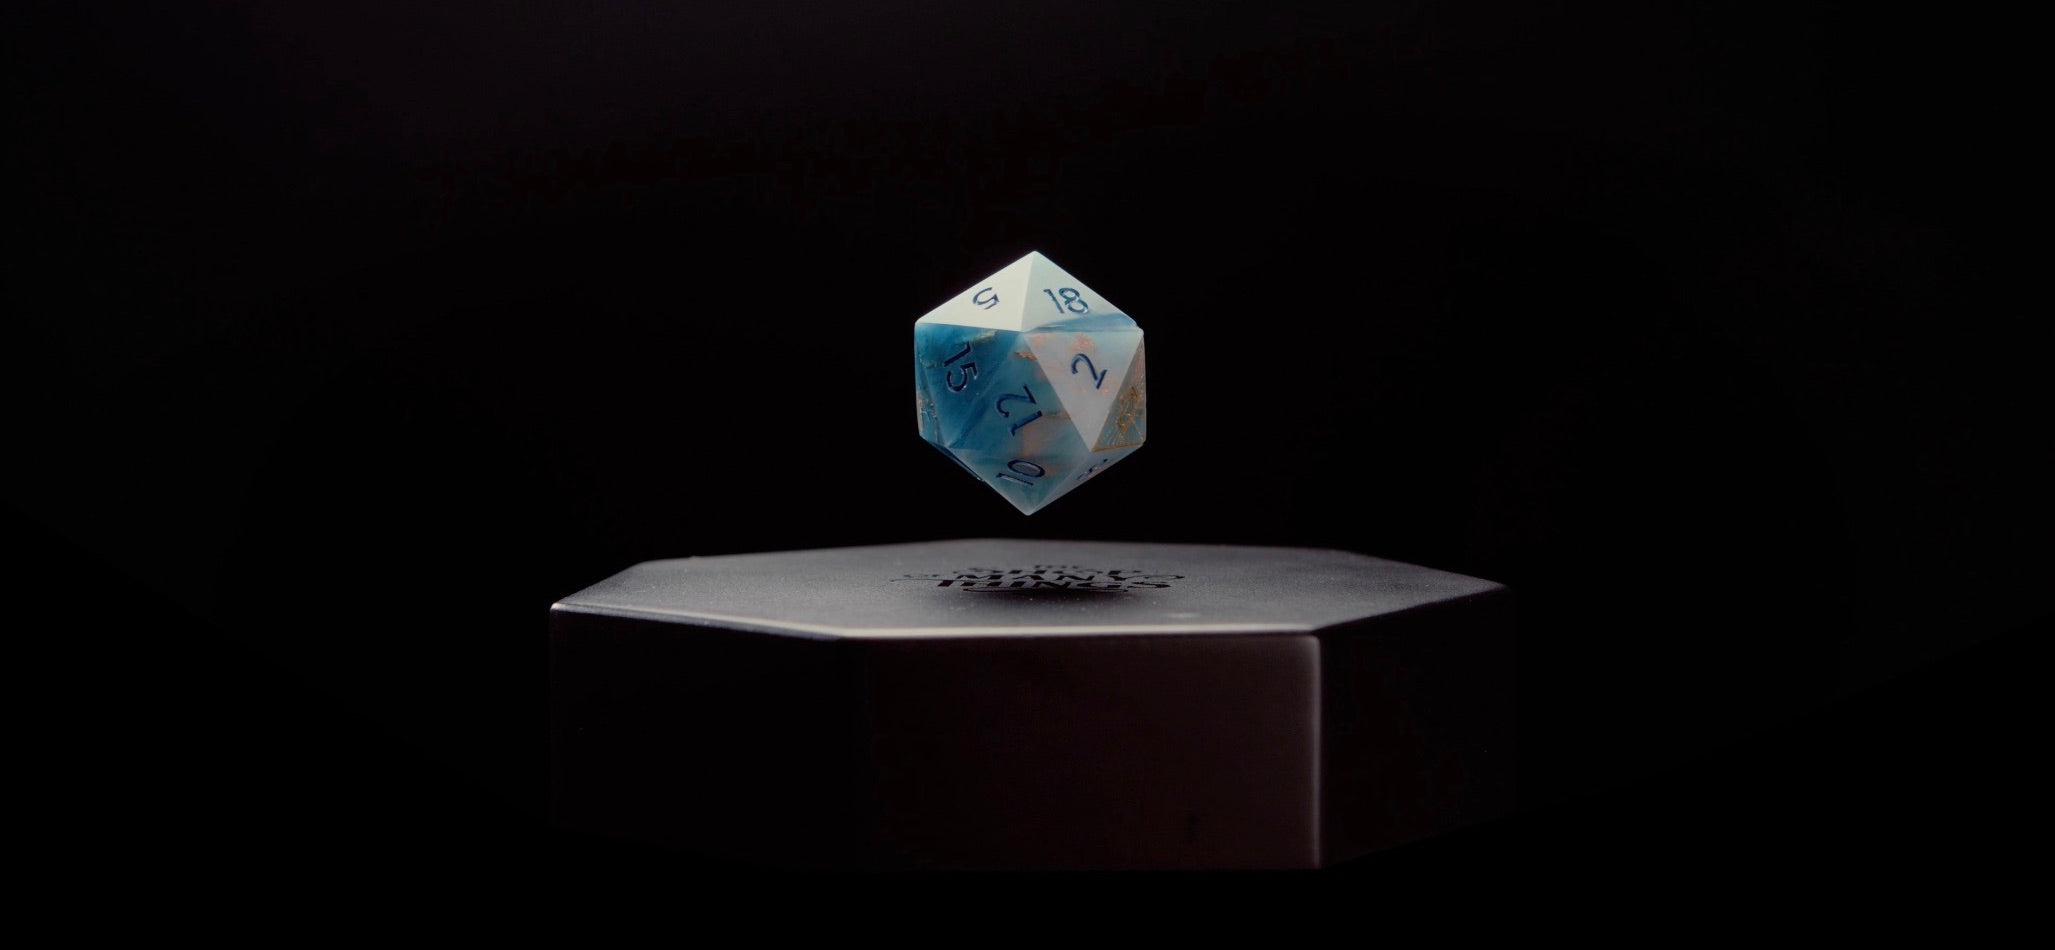 Professional wide shot of the blue floating dice